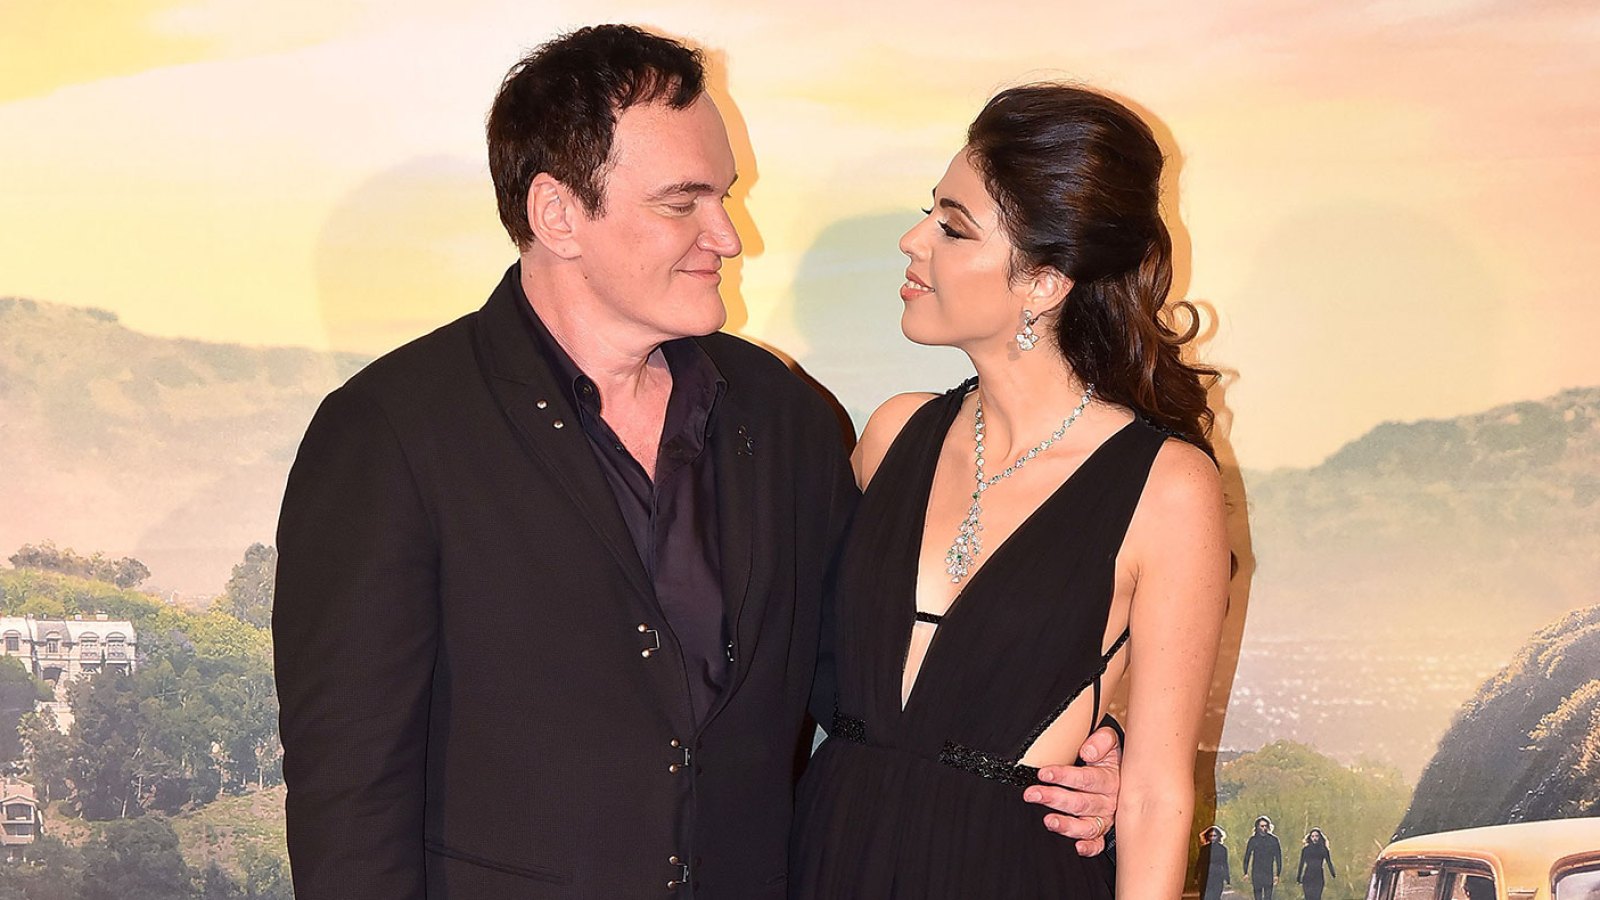 Quentin Tarantino’s Wife Daniella Pick Is Pregnant With Their 2nd Child